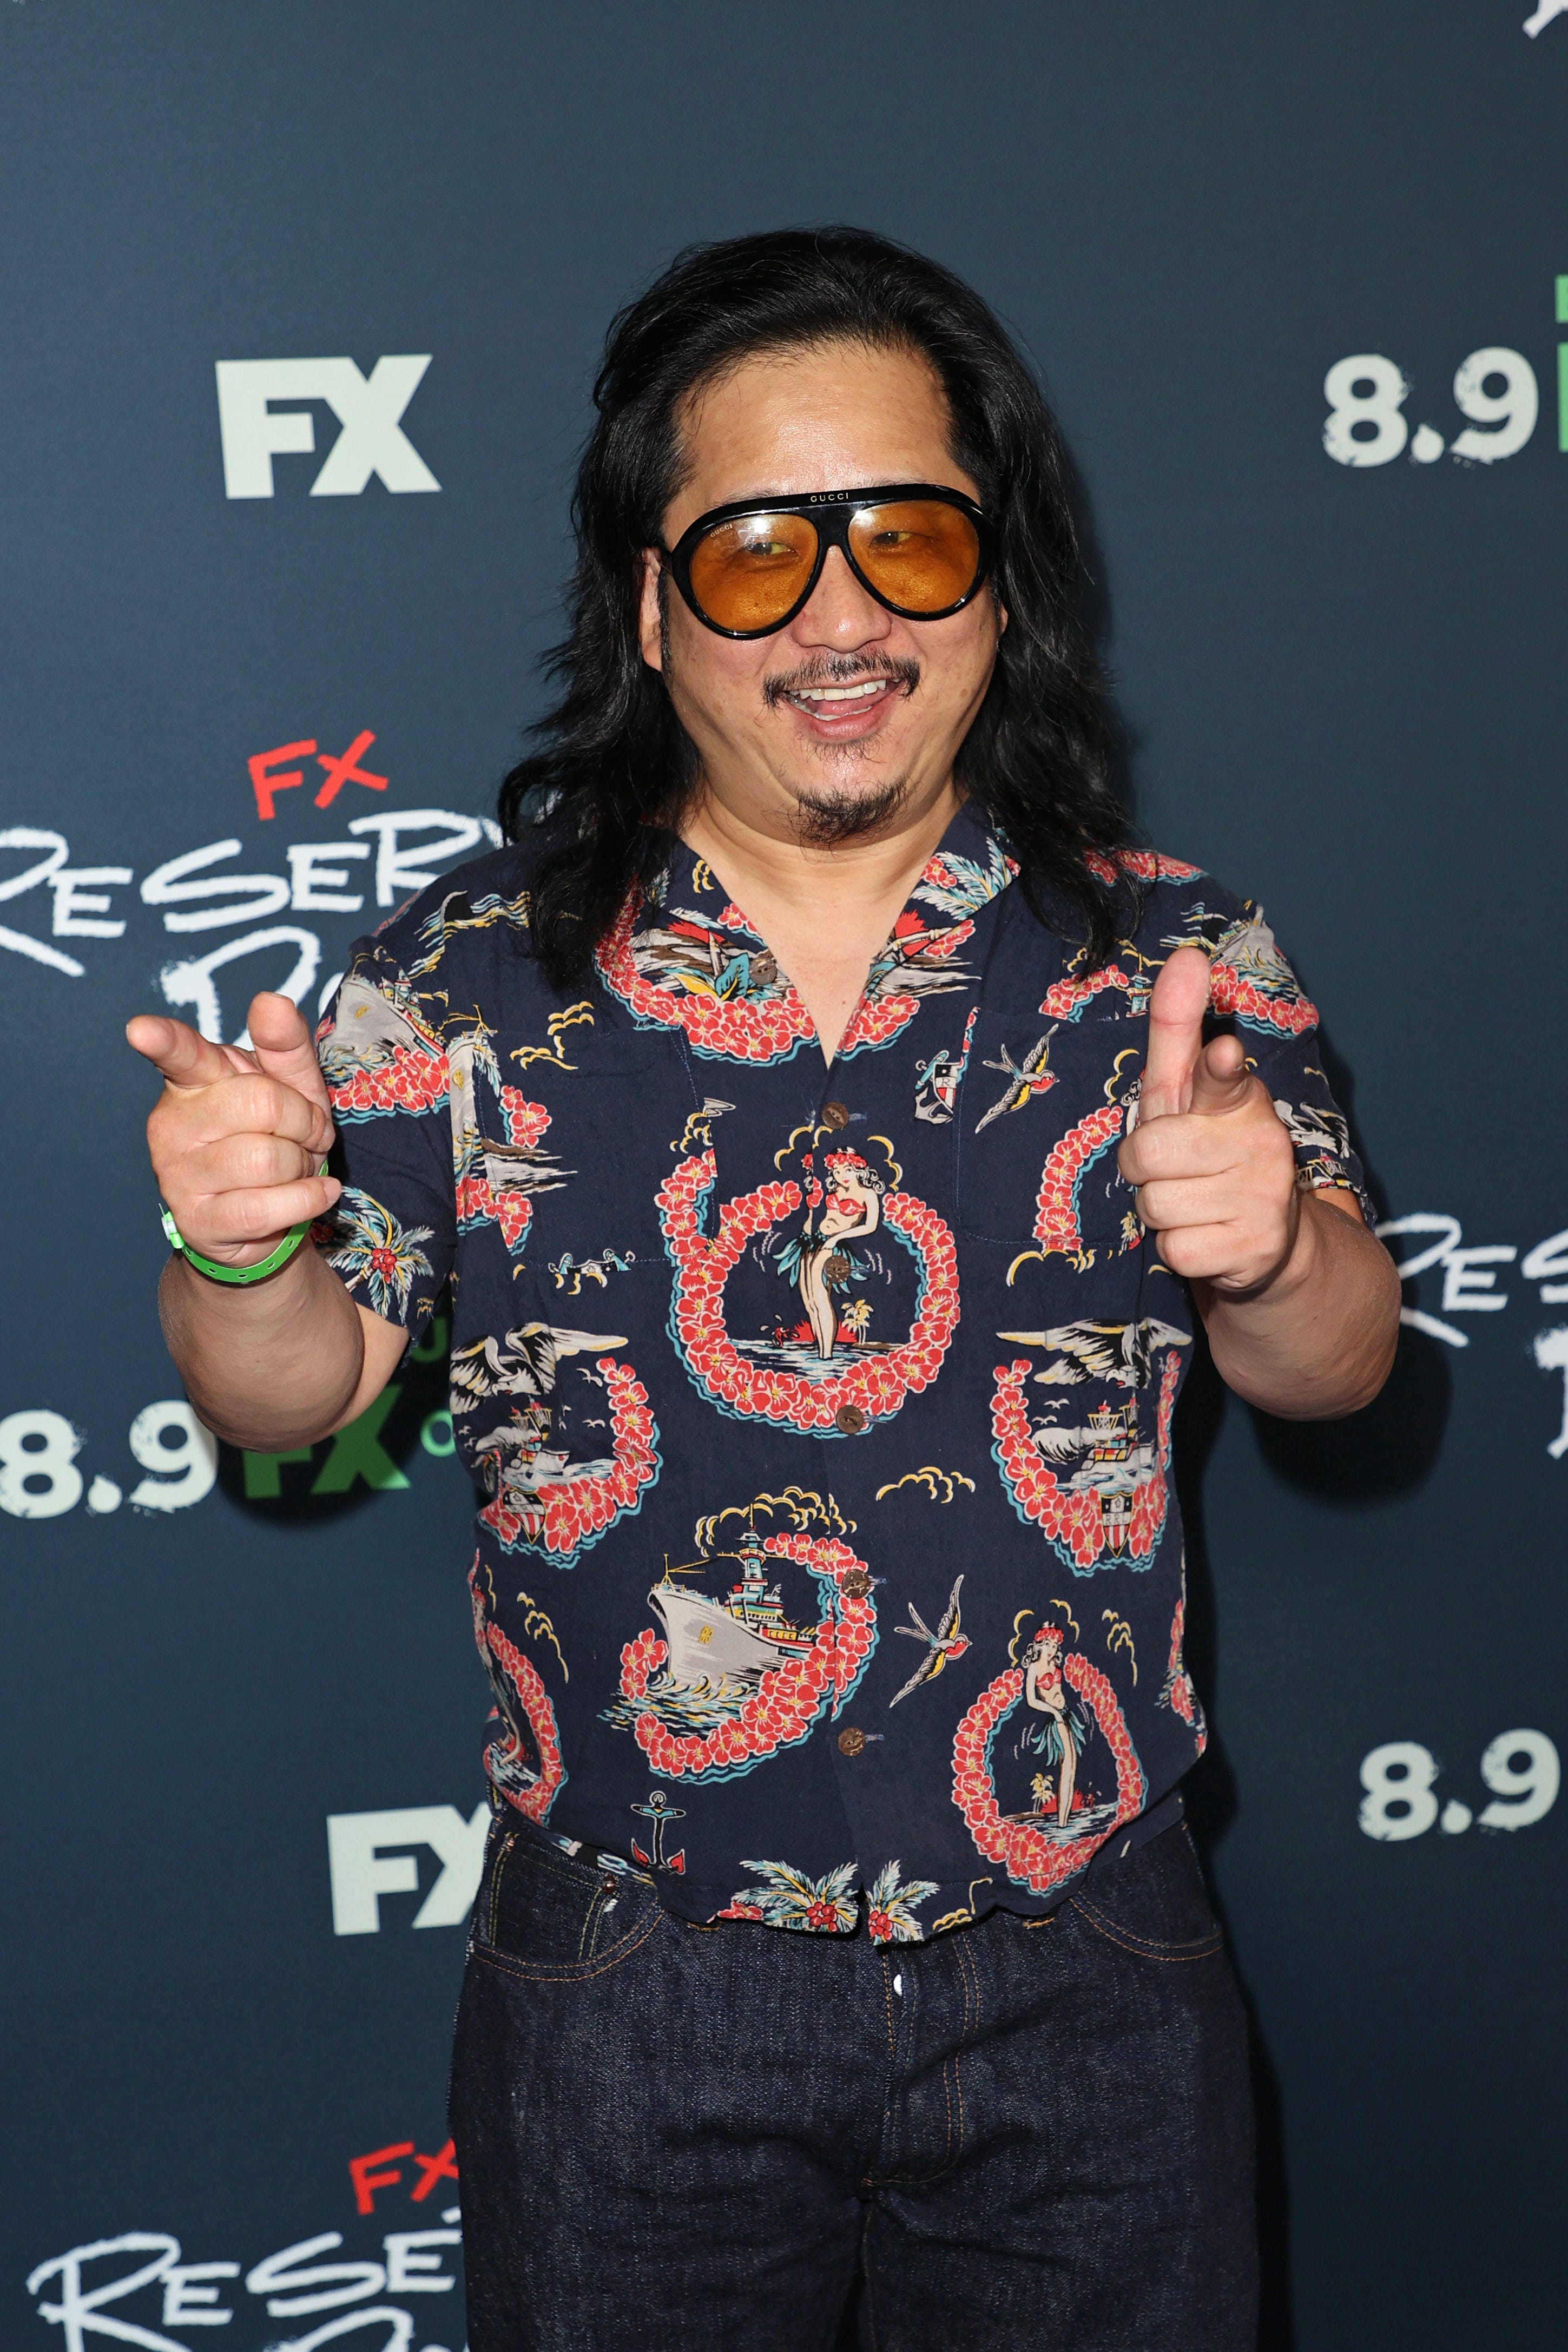 Bobby Lee says his Tijuana story is 'not real,' responds to backlash